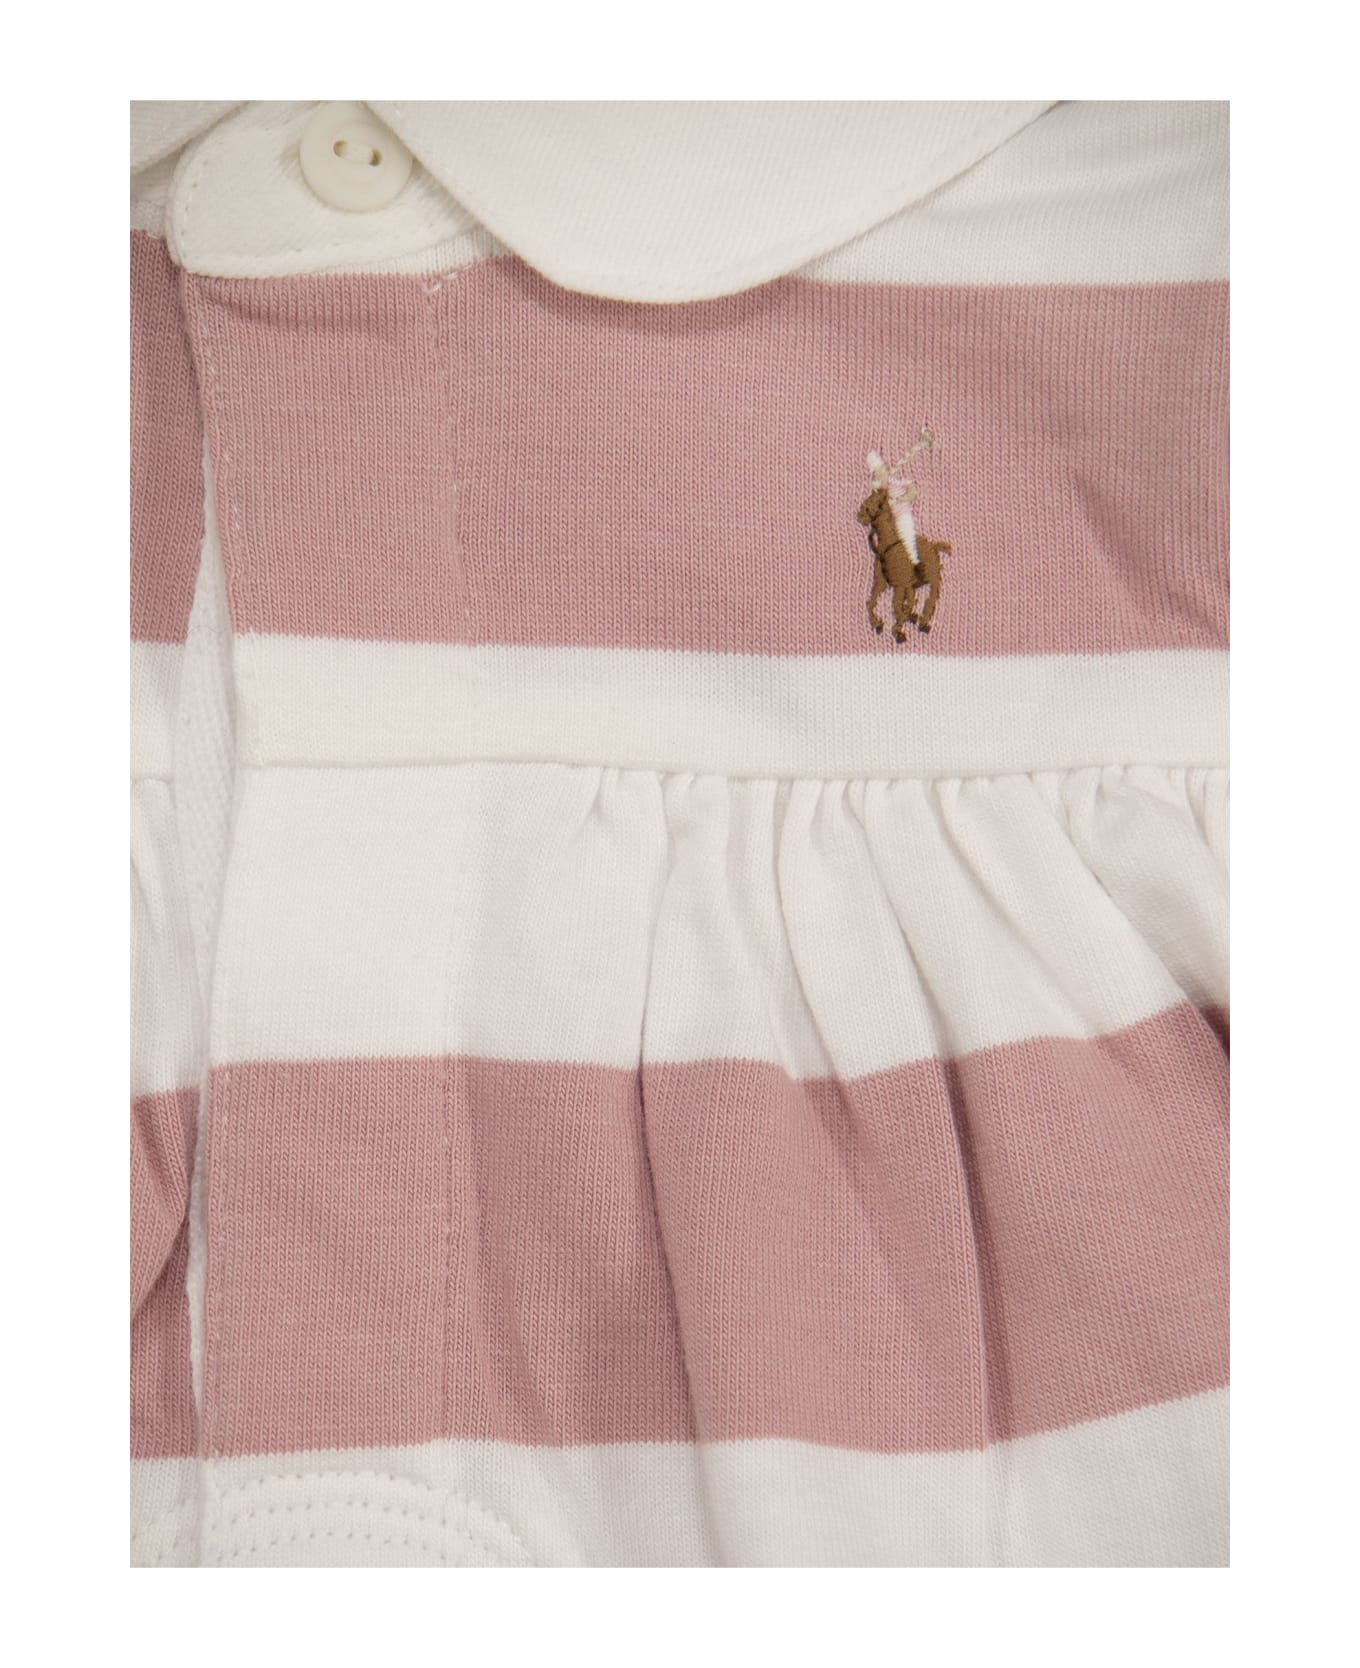 Polo Ralph Lauren Striped Jersey Rugby Dress With Culottes - Pink/white